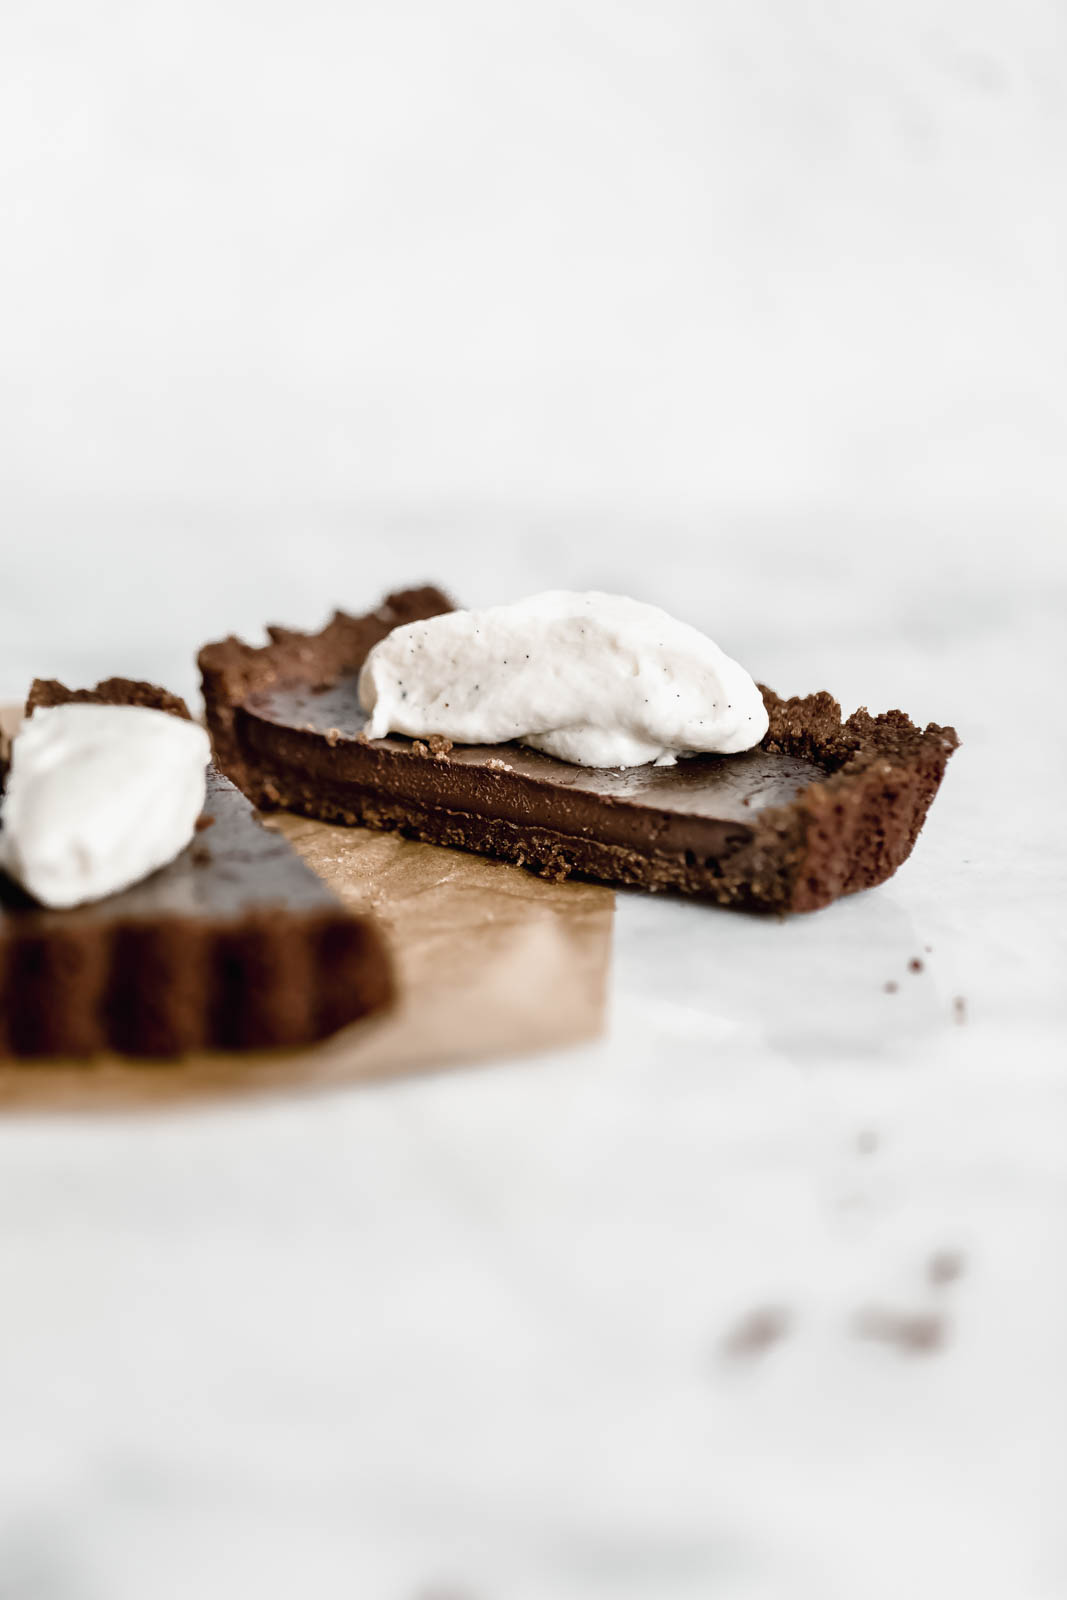 A Mocha Chocolate Tart made with a chocolate graham cracker crust, rich mocha filling, and topped with a crème fraîche whipped cream!